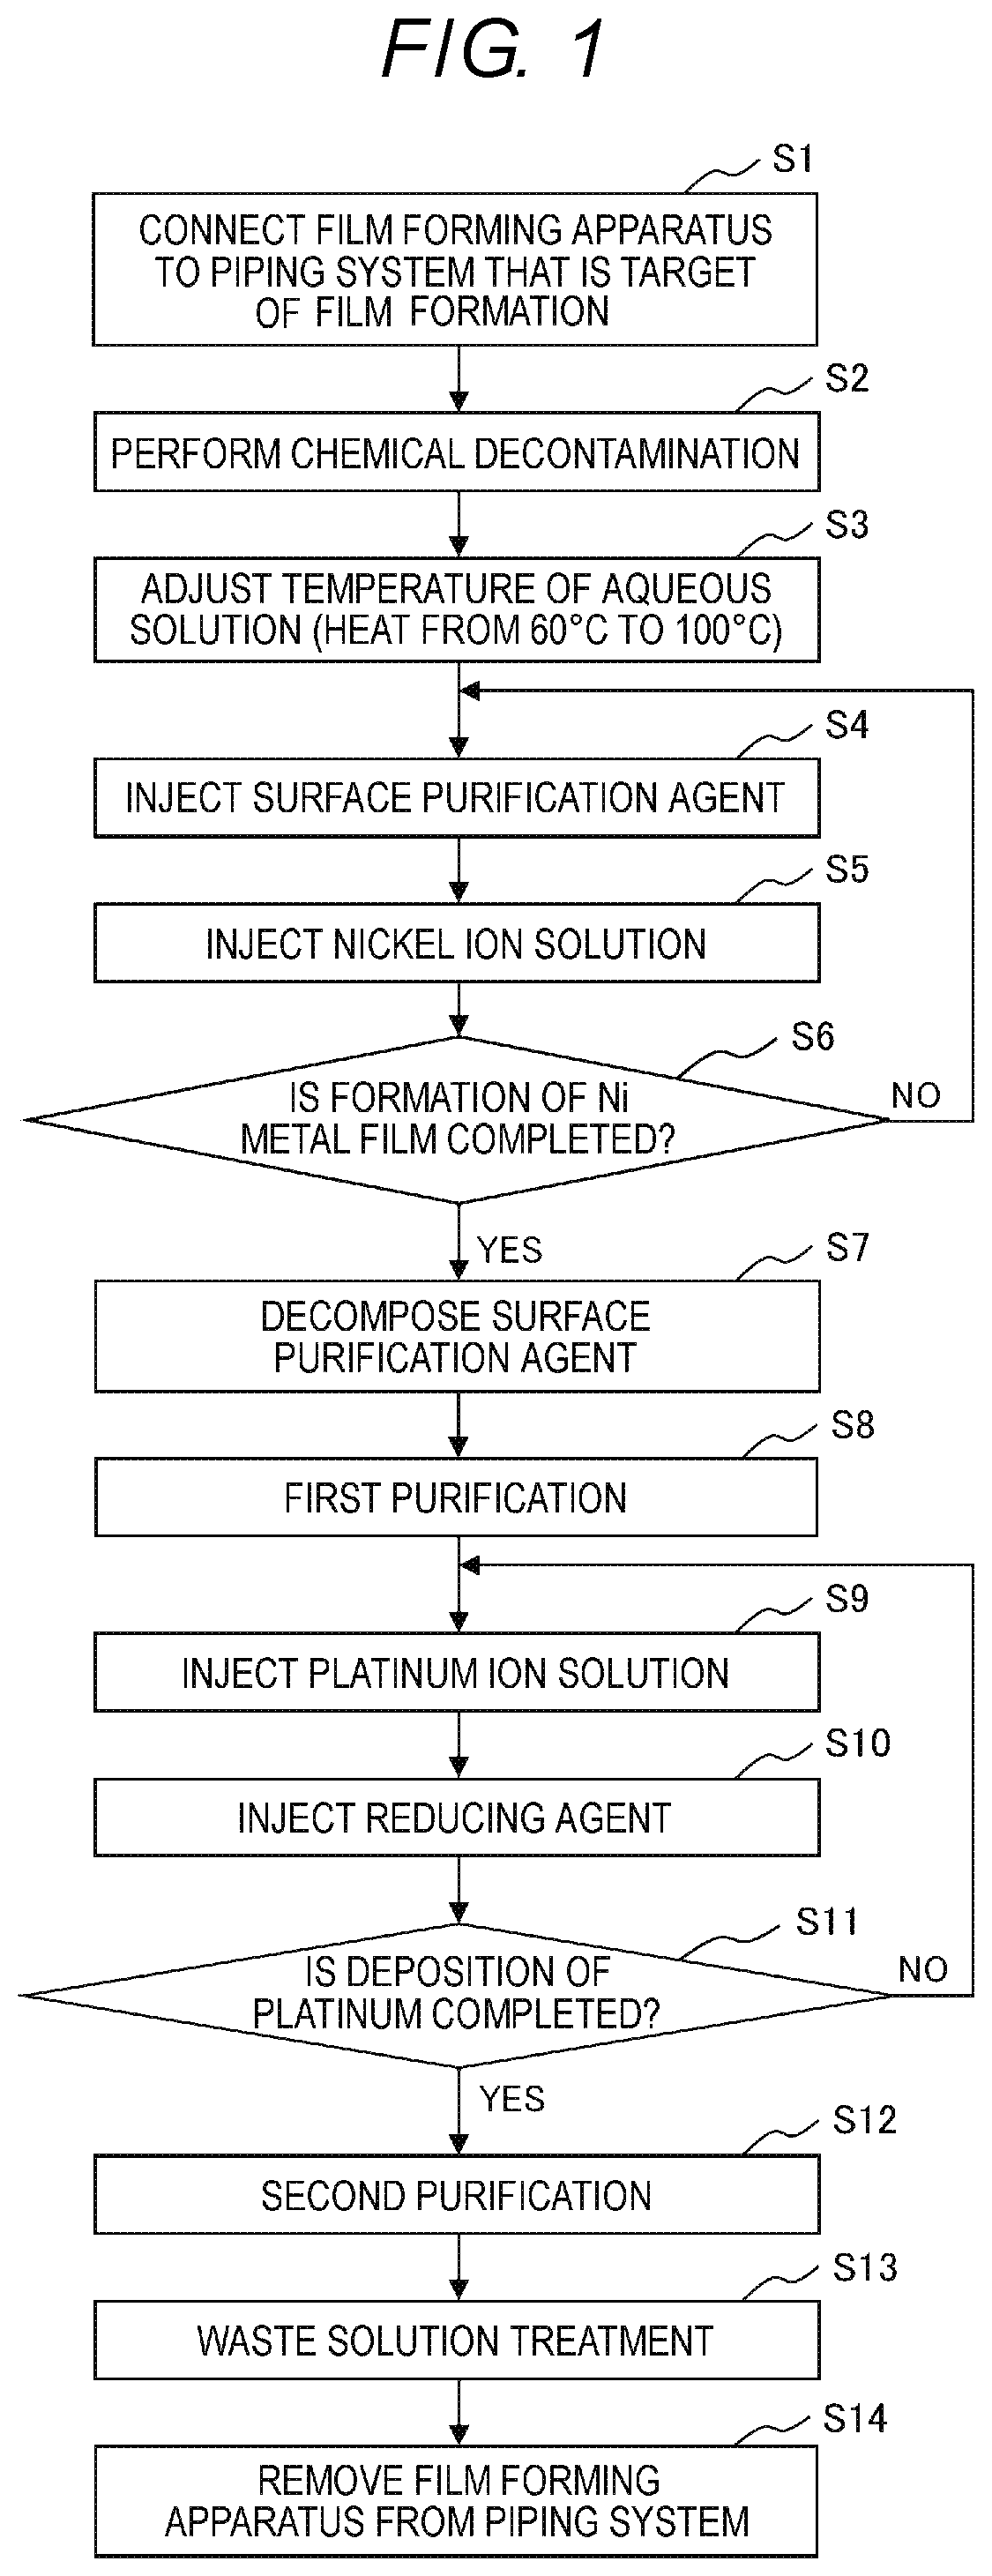 Method for Depositing Noble Metal to Carbon Steel Member of Nuclear Power Plant and Method for Suppressing Radionuclide Deposition on Carbon Steel Member of Nuclear Power Plant